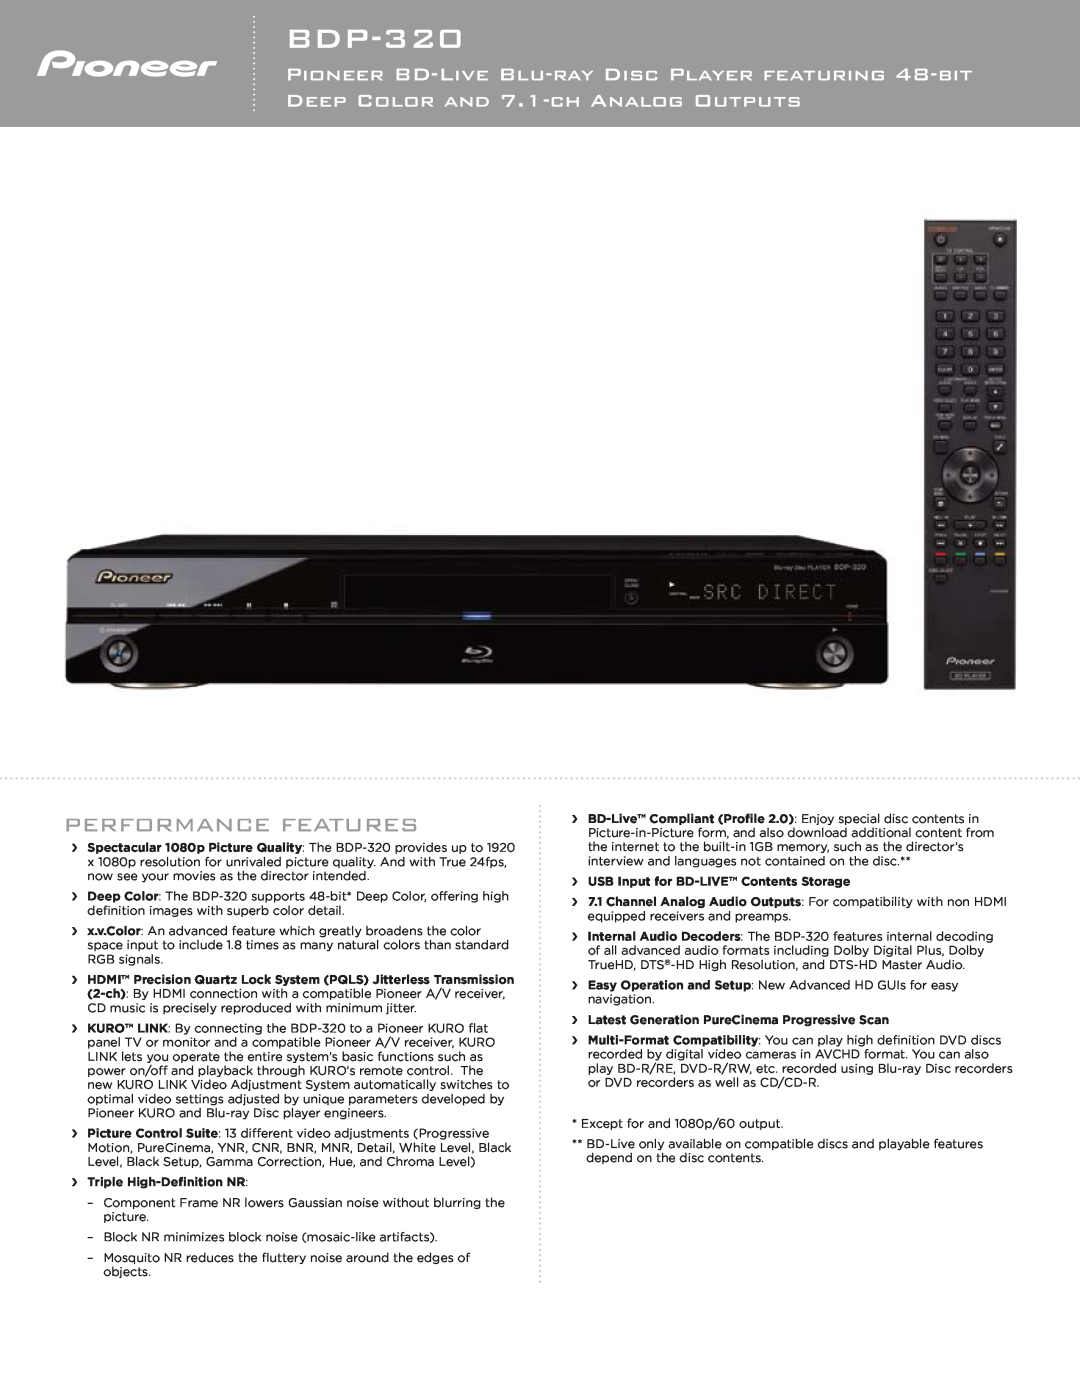 Pioneer BDP-320 manual Performance Features, ›› Triple High-Definition NR, ›› USB Input for BD-LIVE Contents Storage 